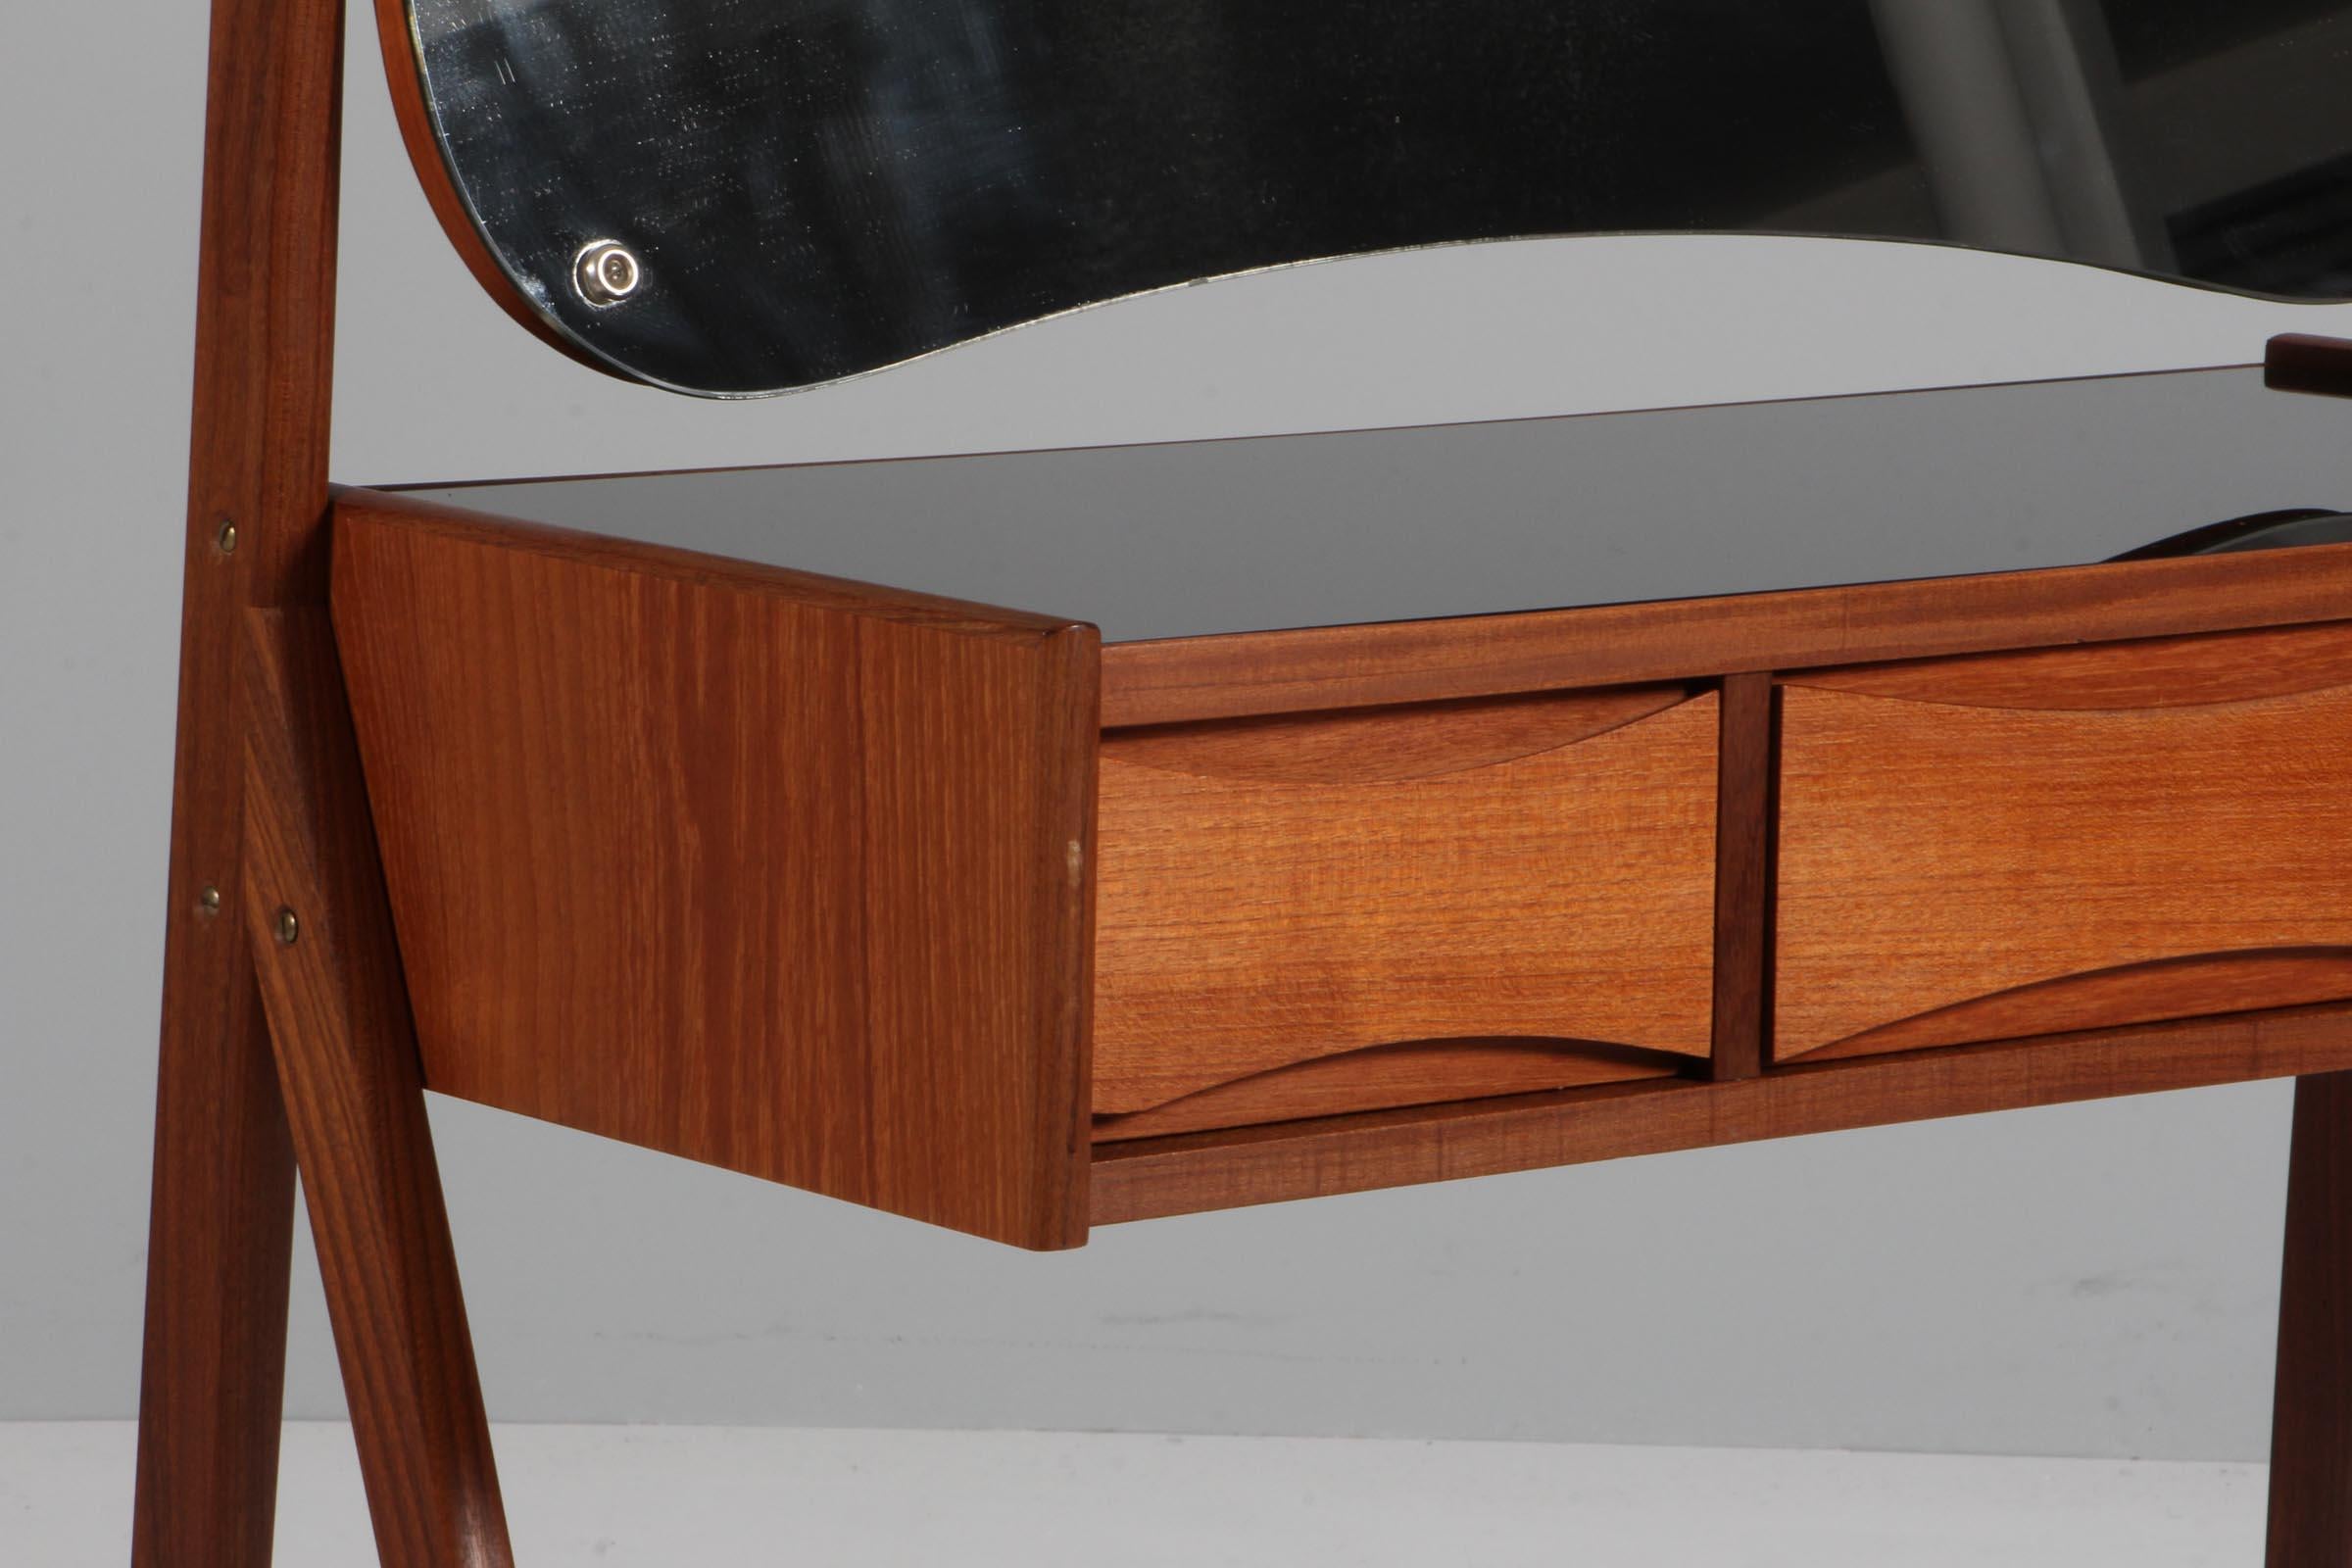 Arne Vodder vanity table in teak. Mirror and drawers.

Made in the 1960s.